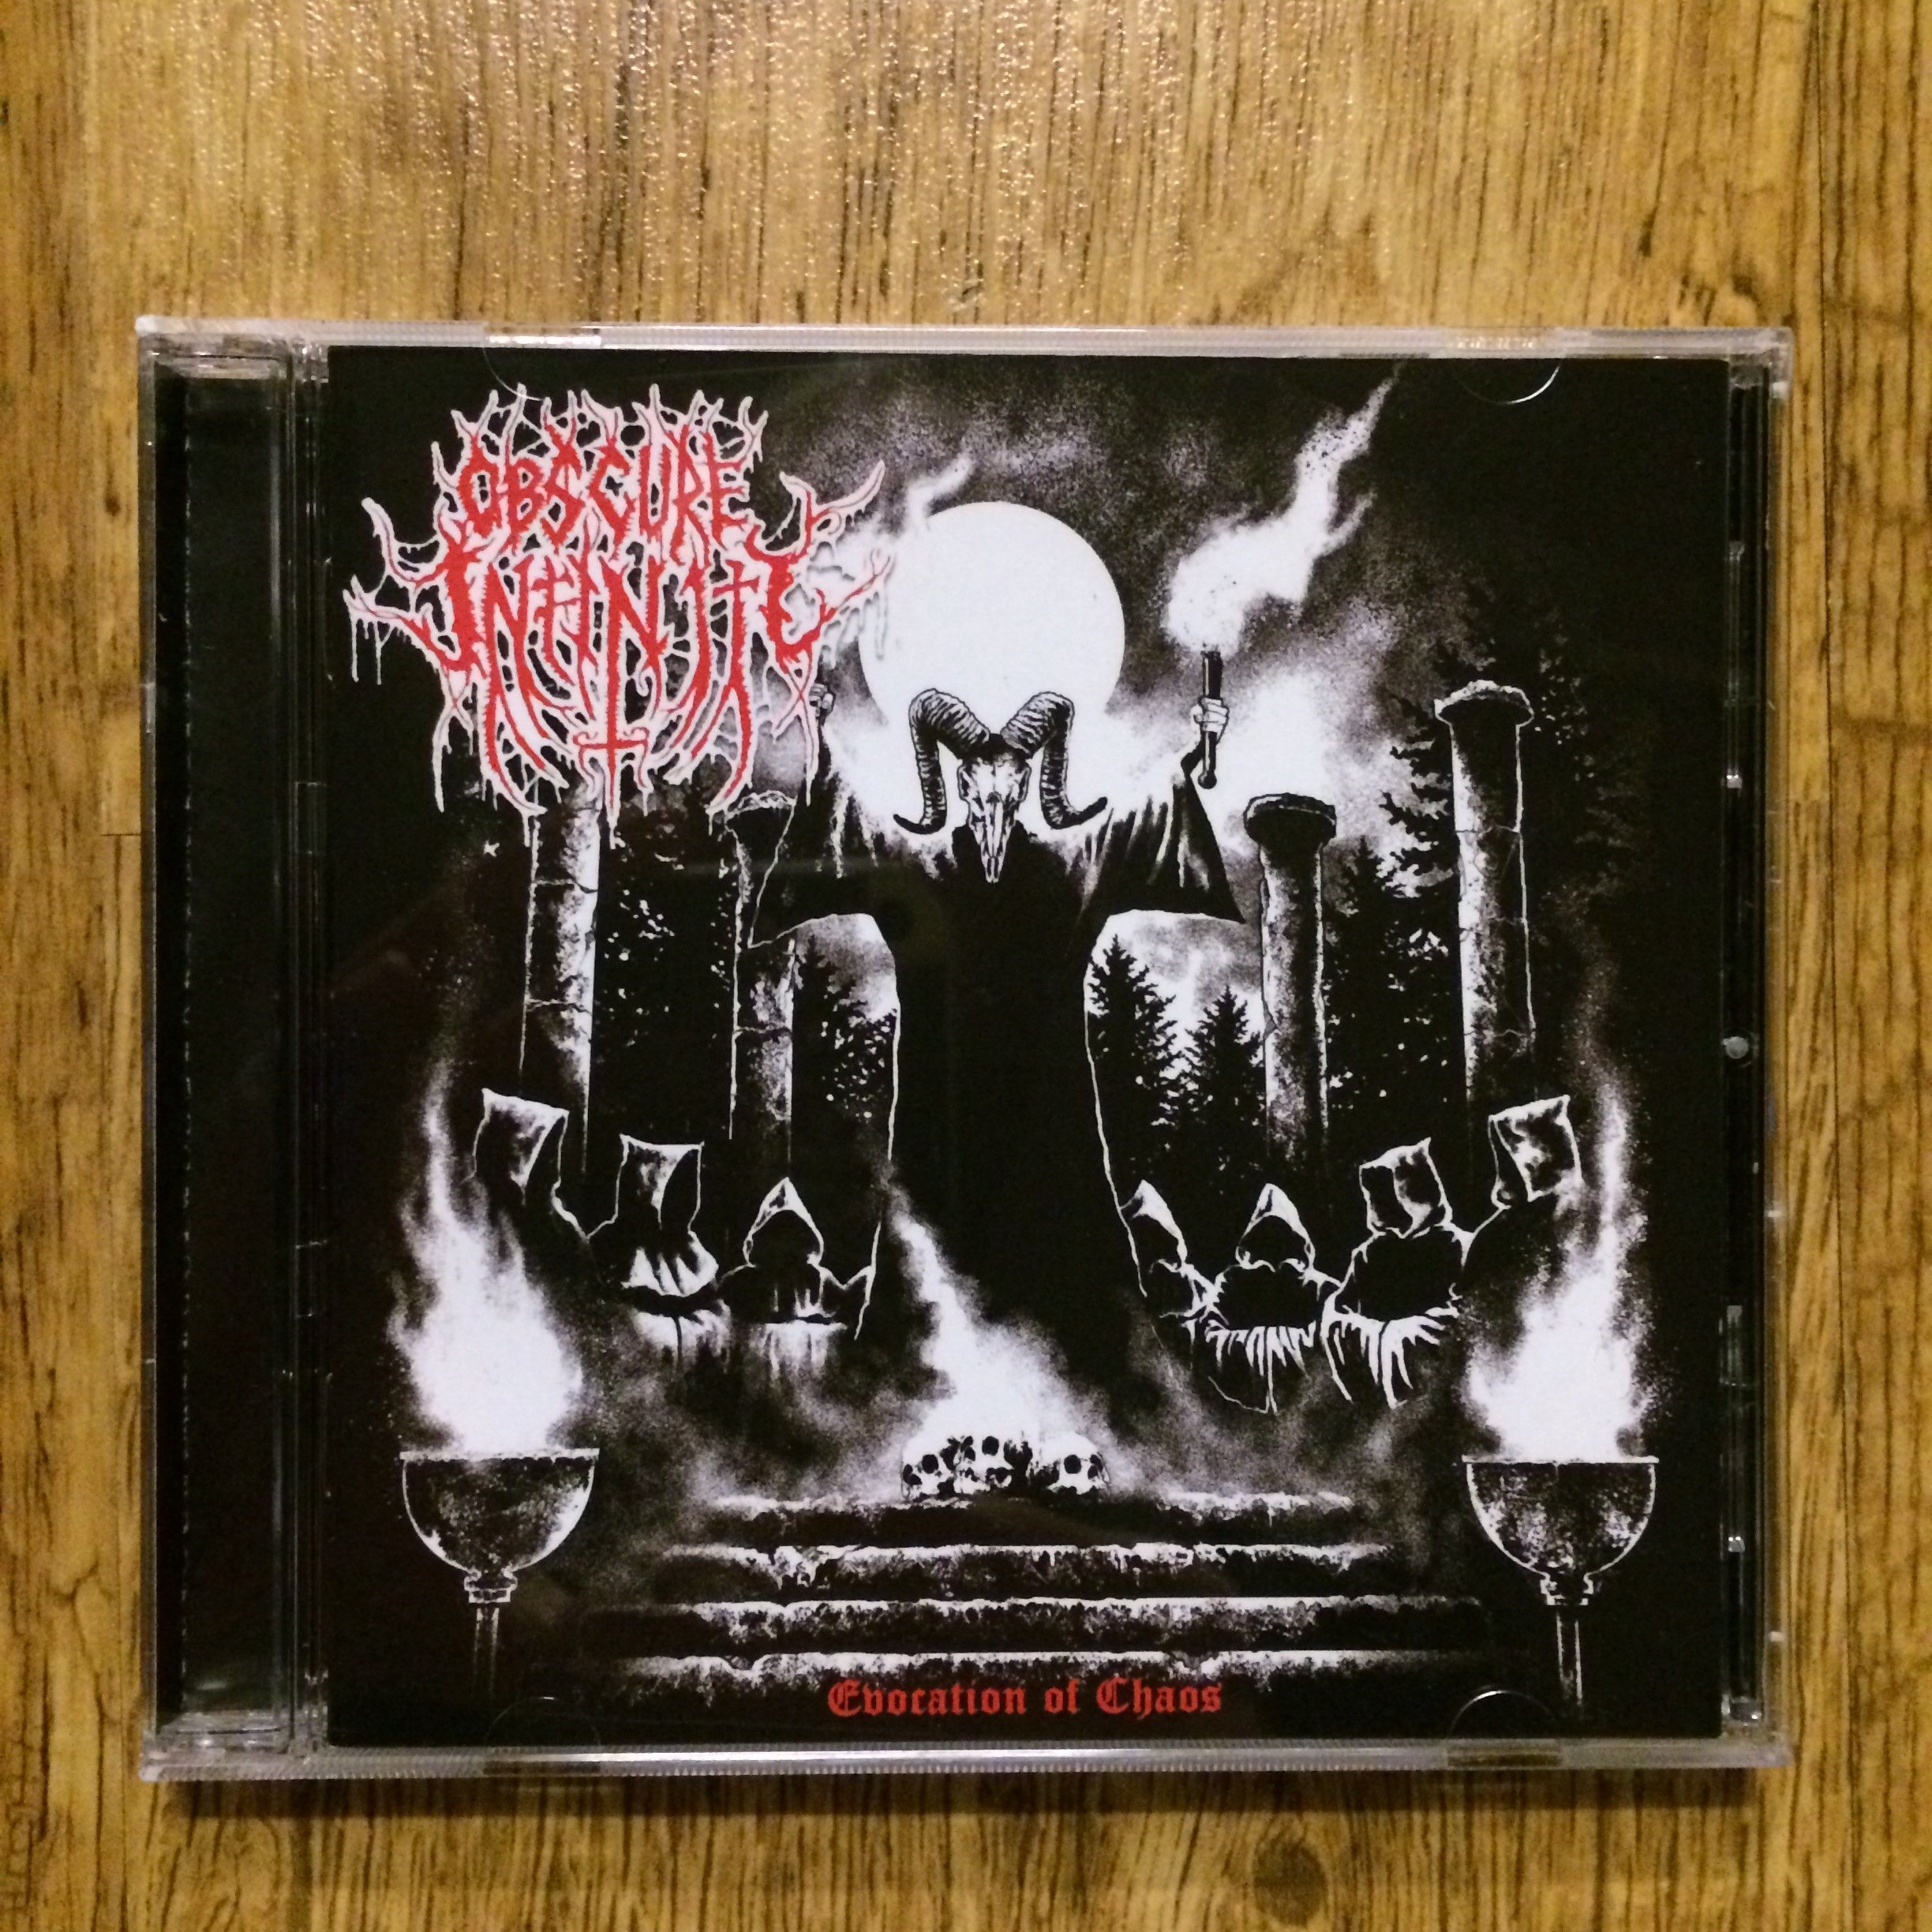 Photo of the Obscure Infinity - "Evocation of Chaos" CD